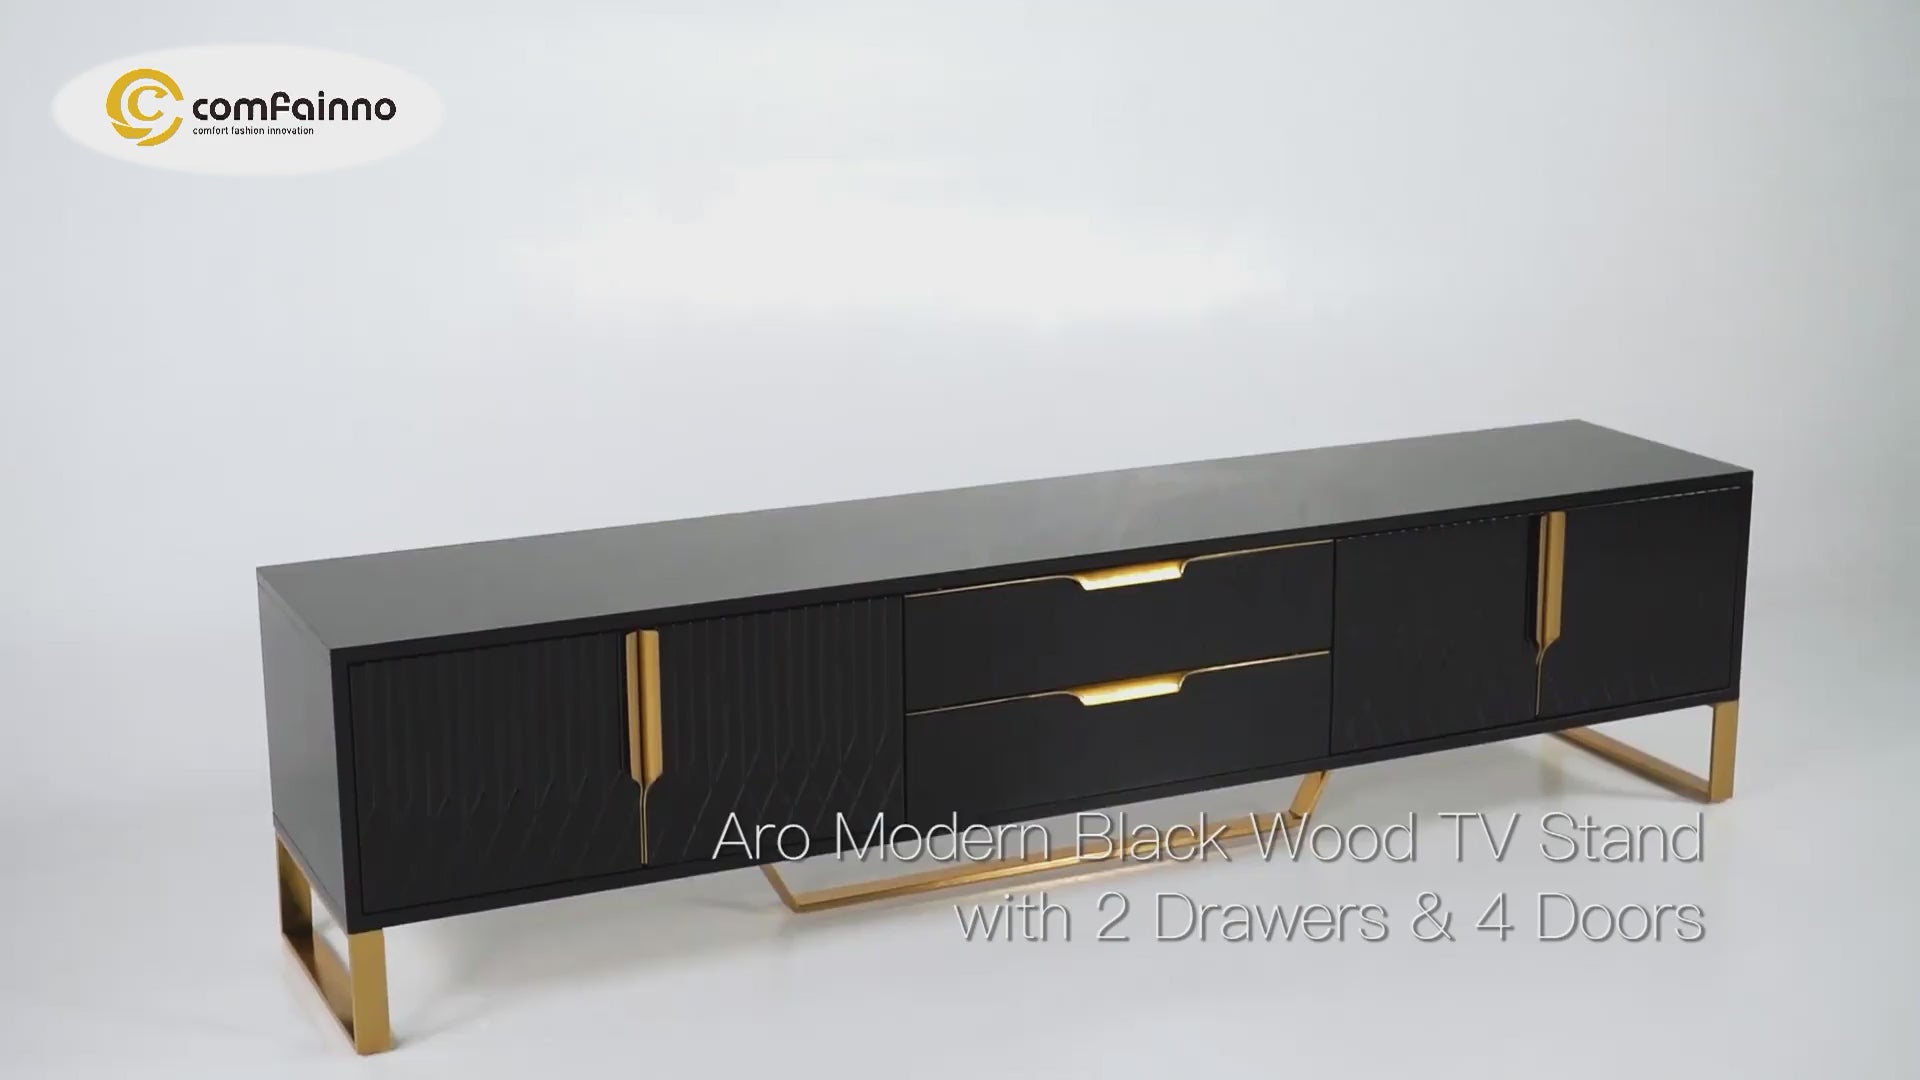 Aro Modern White Wood TV Stand with 2 Drawers & 4 Doors Small Media Console White & Black